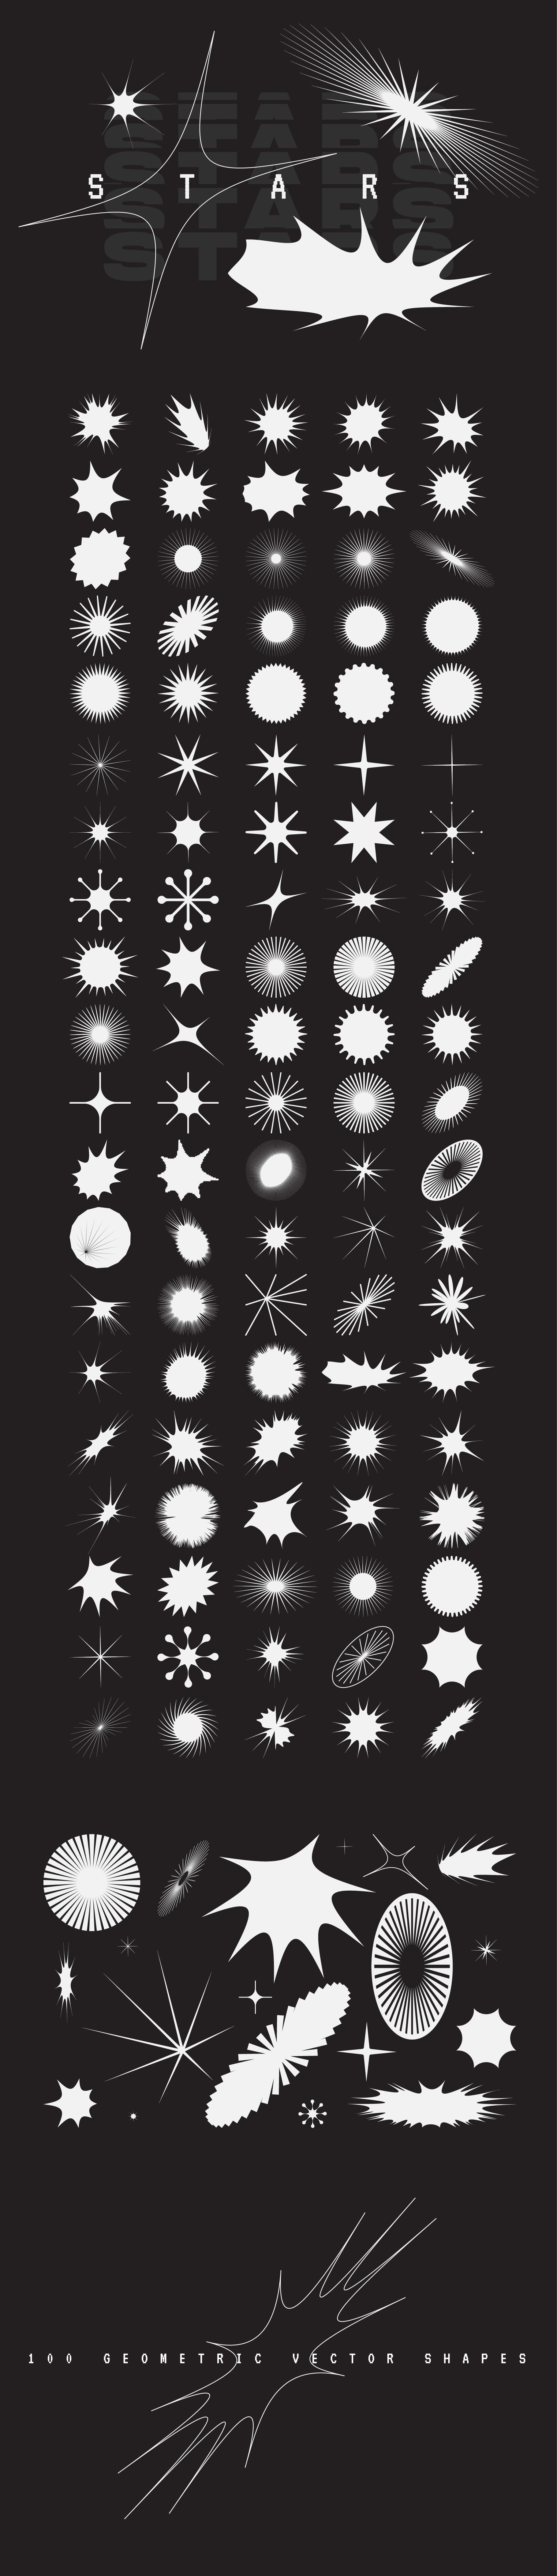 An analysis of the star-shaped element, many variations from usual shapes to distorted.